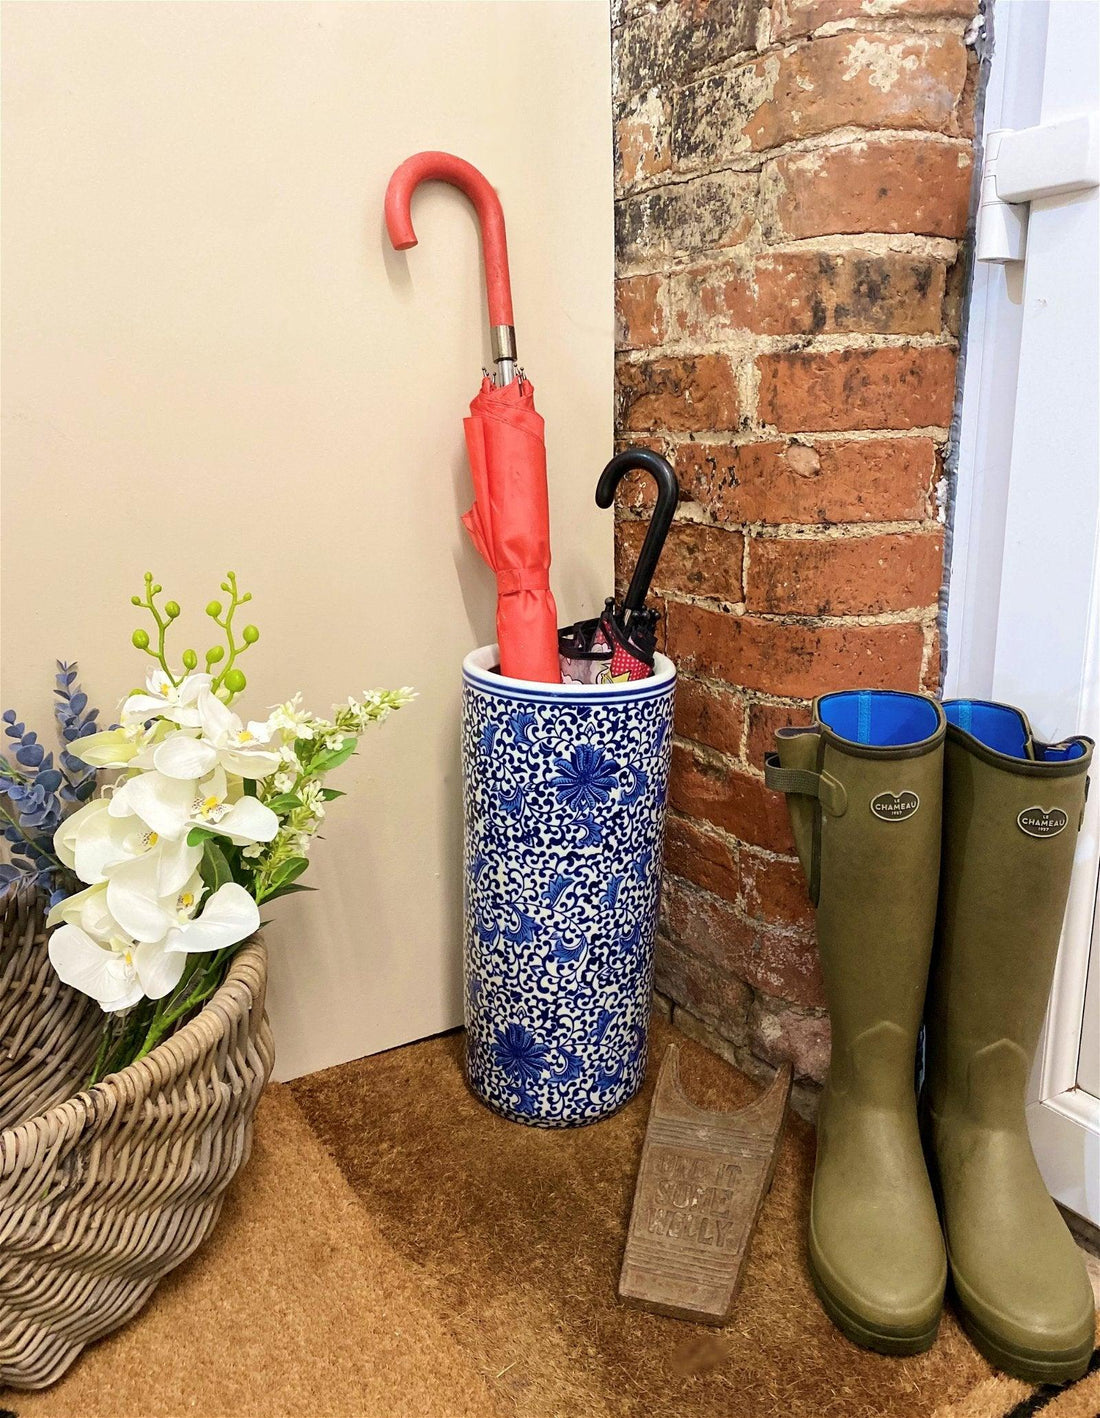 White With Blue Floral Print Umbrella Stand - £59.99 - 